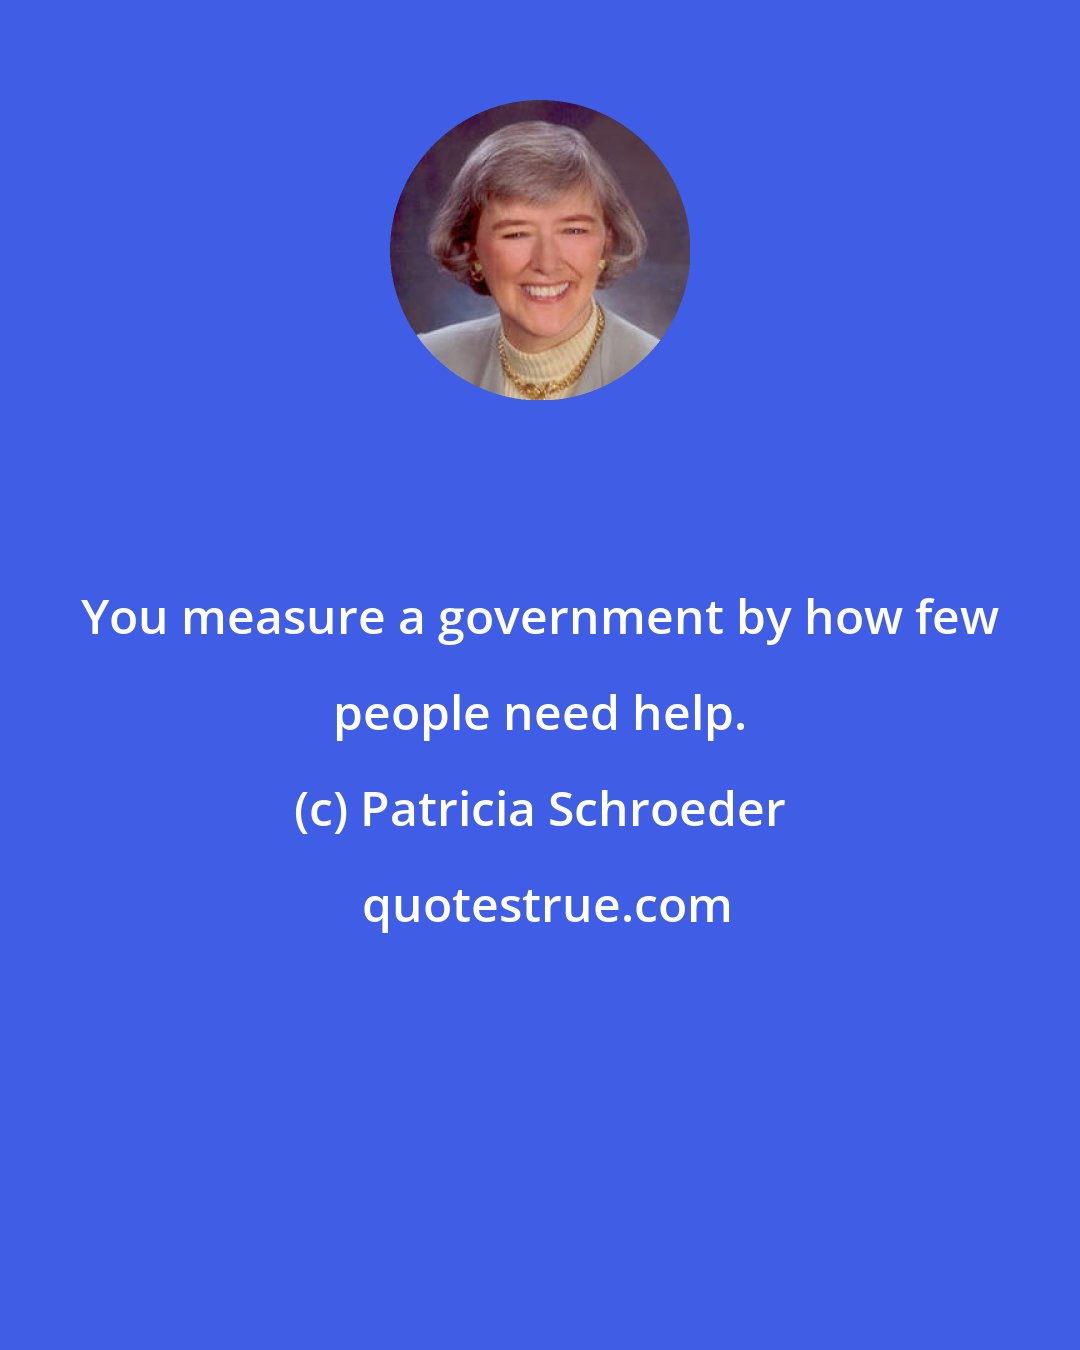 Patricia Schroeder: You measure a government by how few people need help.